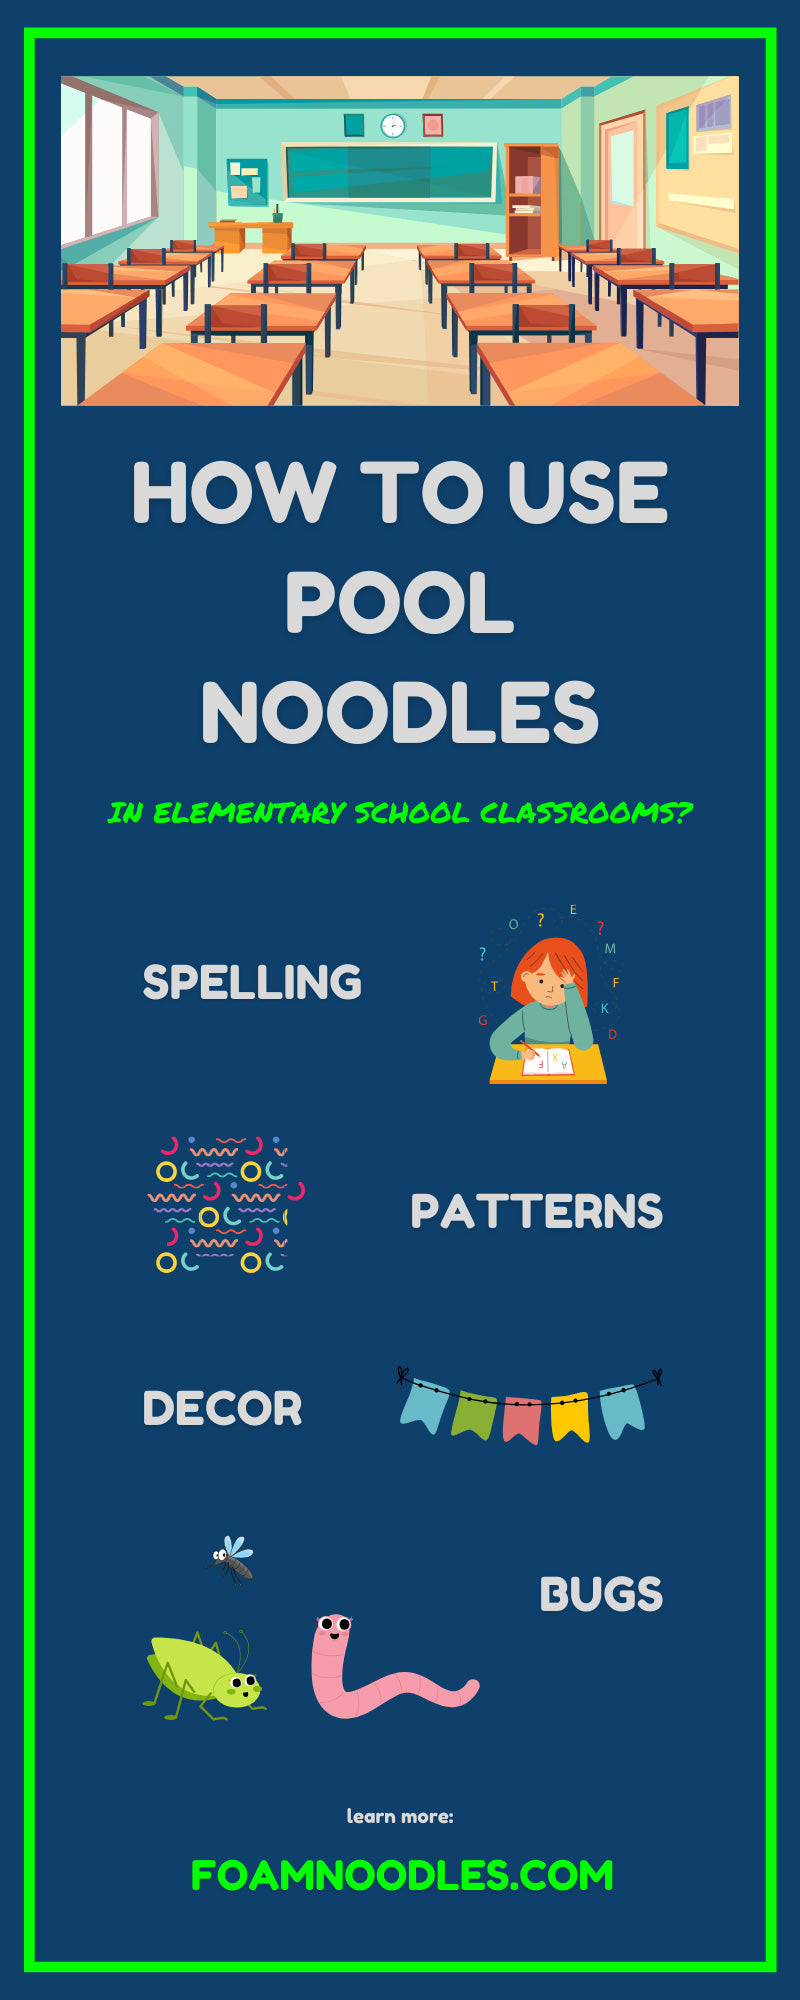 How To Use Pool Noodles in Elementary School Classrooms?